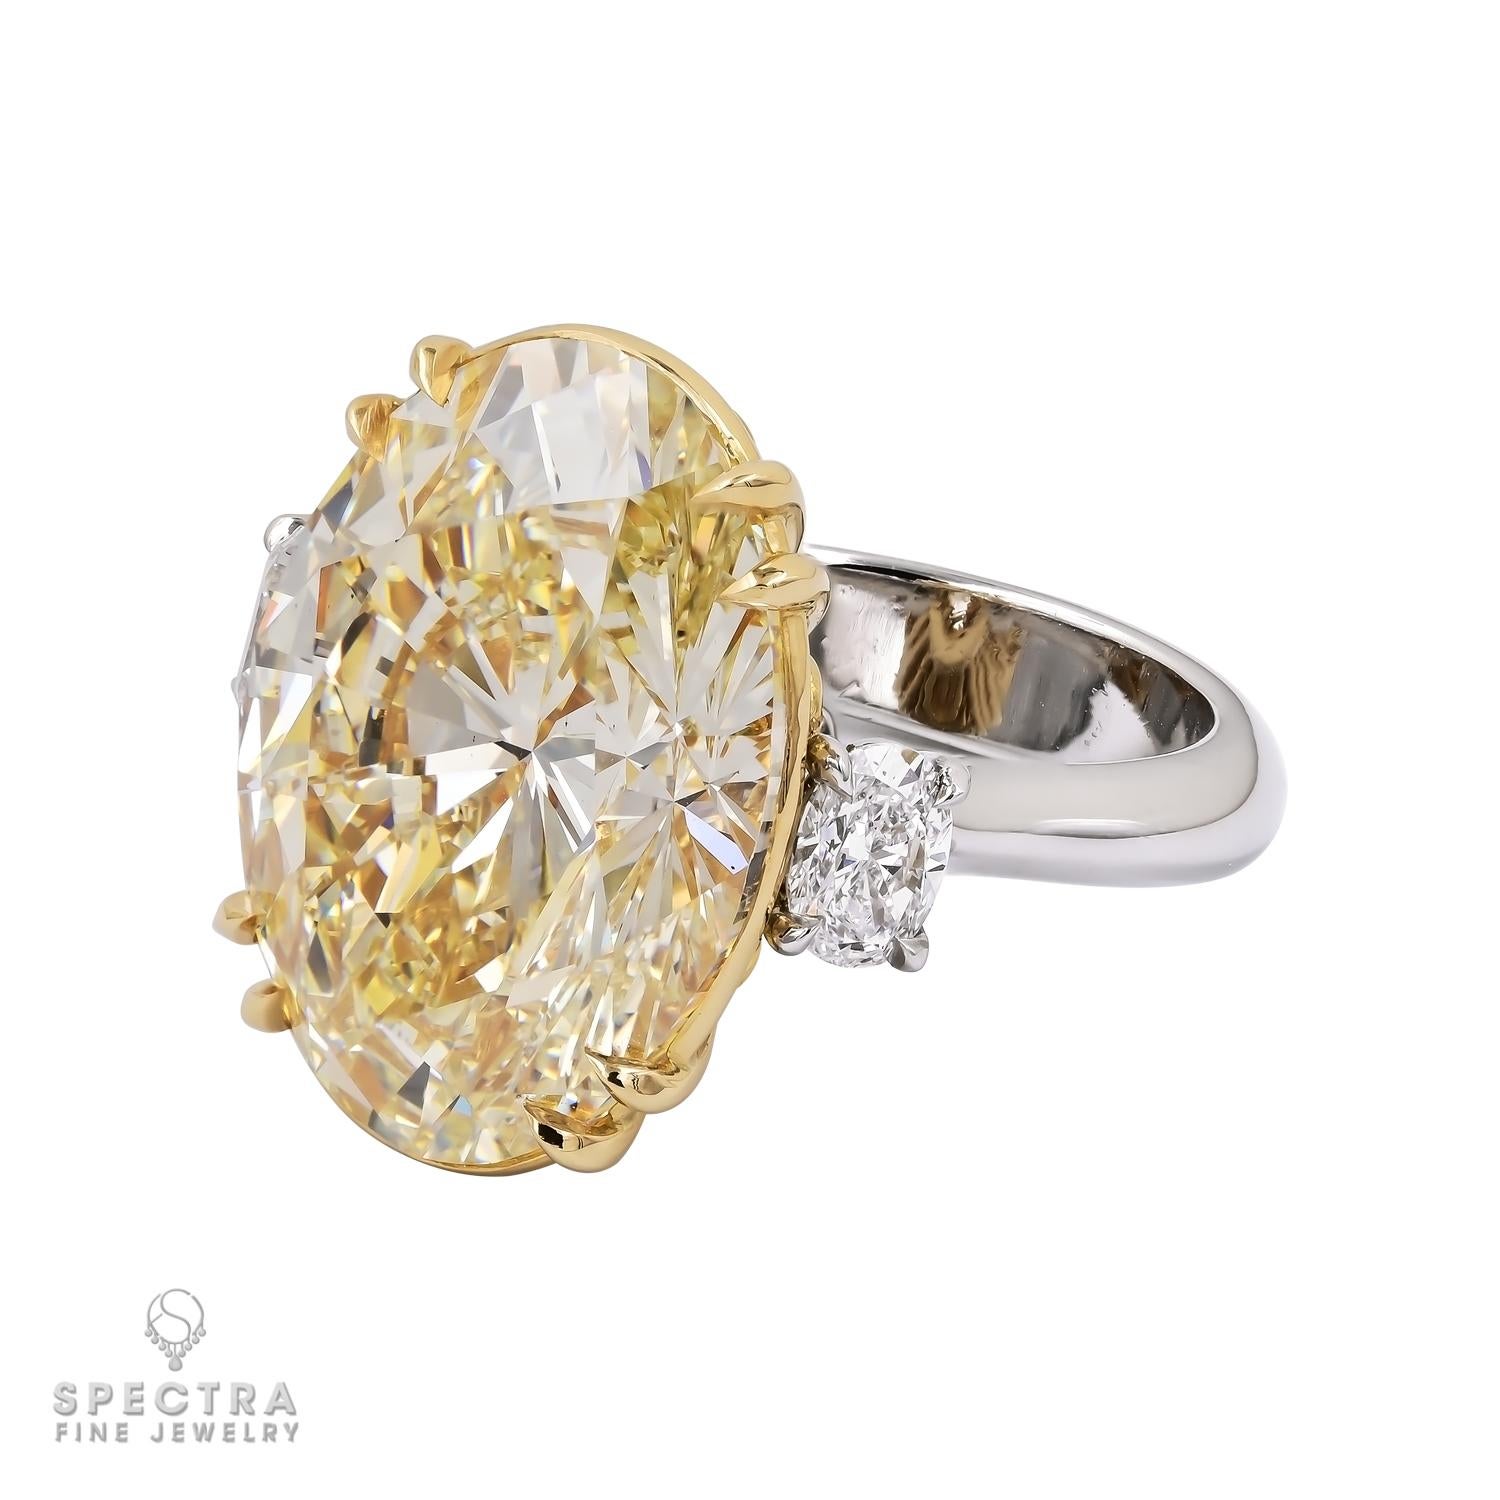 Introducing an opulent marvel from the atelier of Spectra Fine Jewelry: a resplendent masterpiece - the 20.17-carat Oval-shaped Fancy Light Yellow Diamond Ring. At its heart, a 20.17-carat Fancy Light Yellow diamond takes center stage, an embodiment